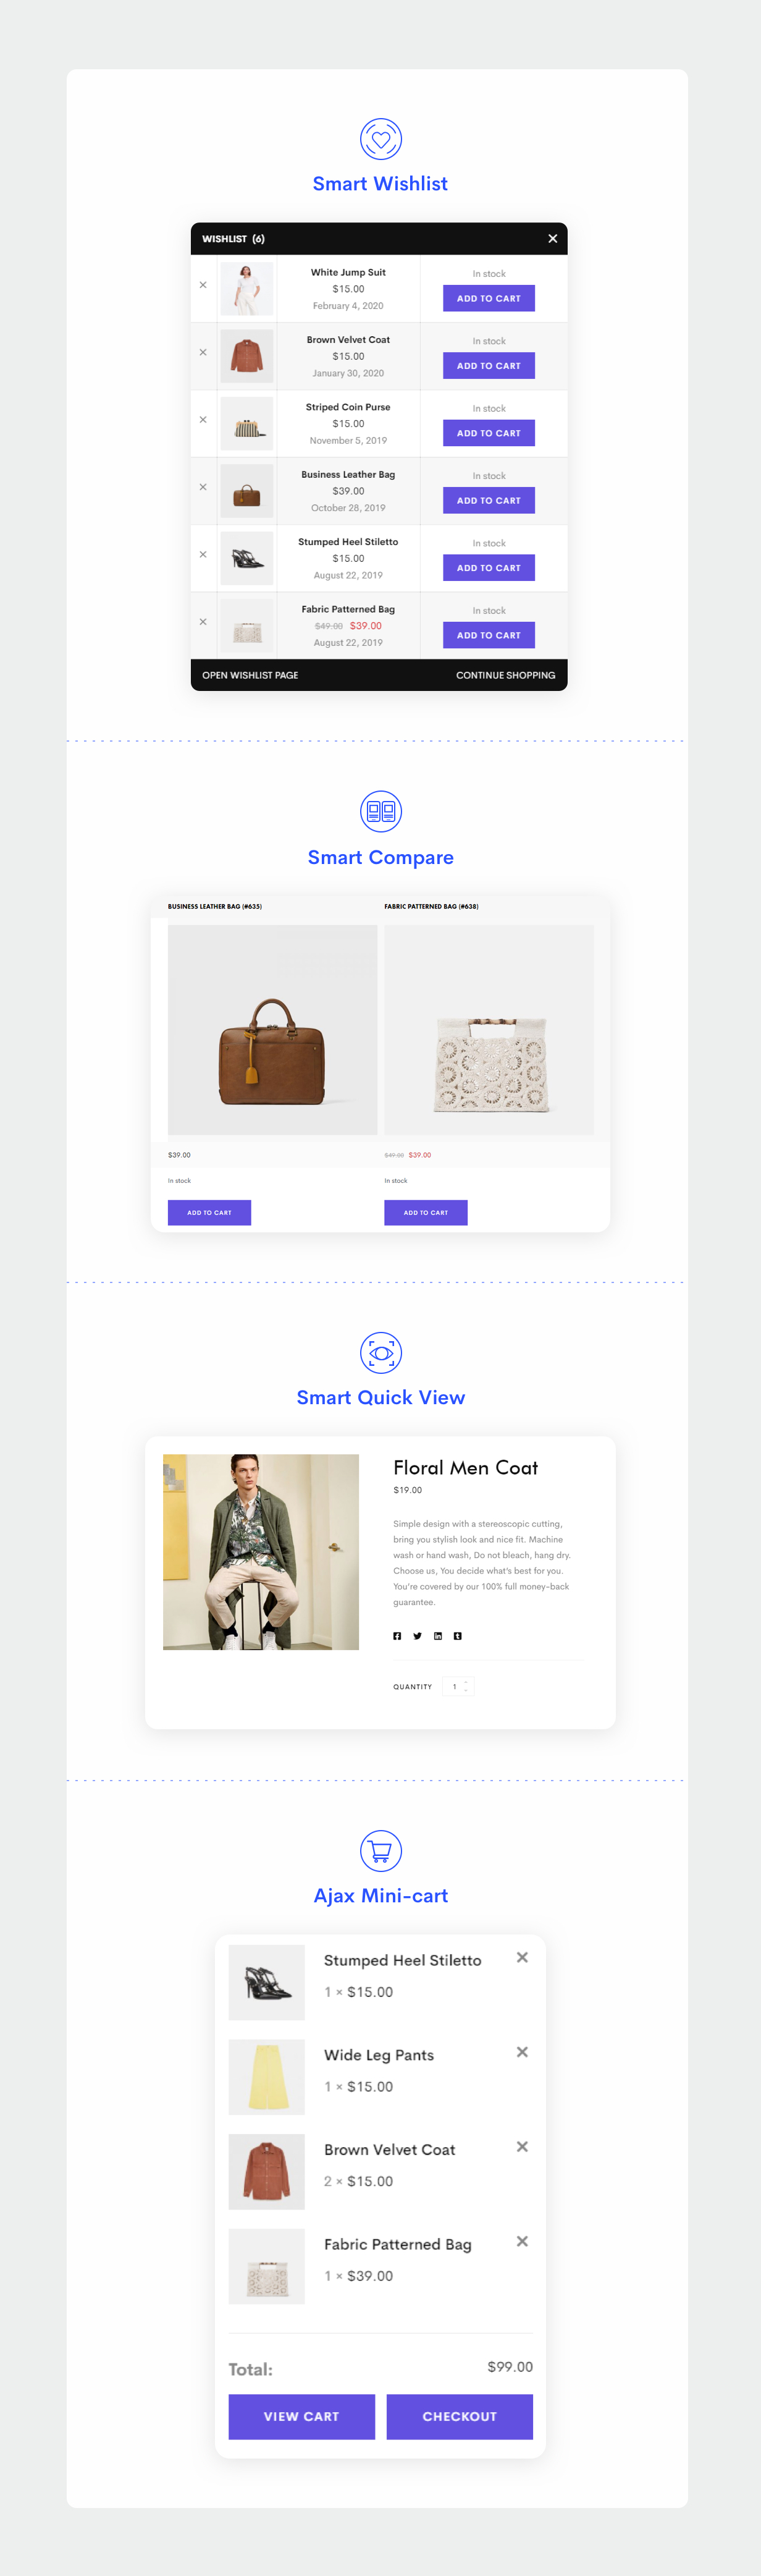 shop feature with smart wishlist, quick view, compare, ajax